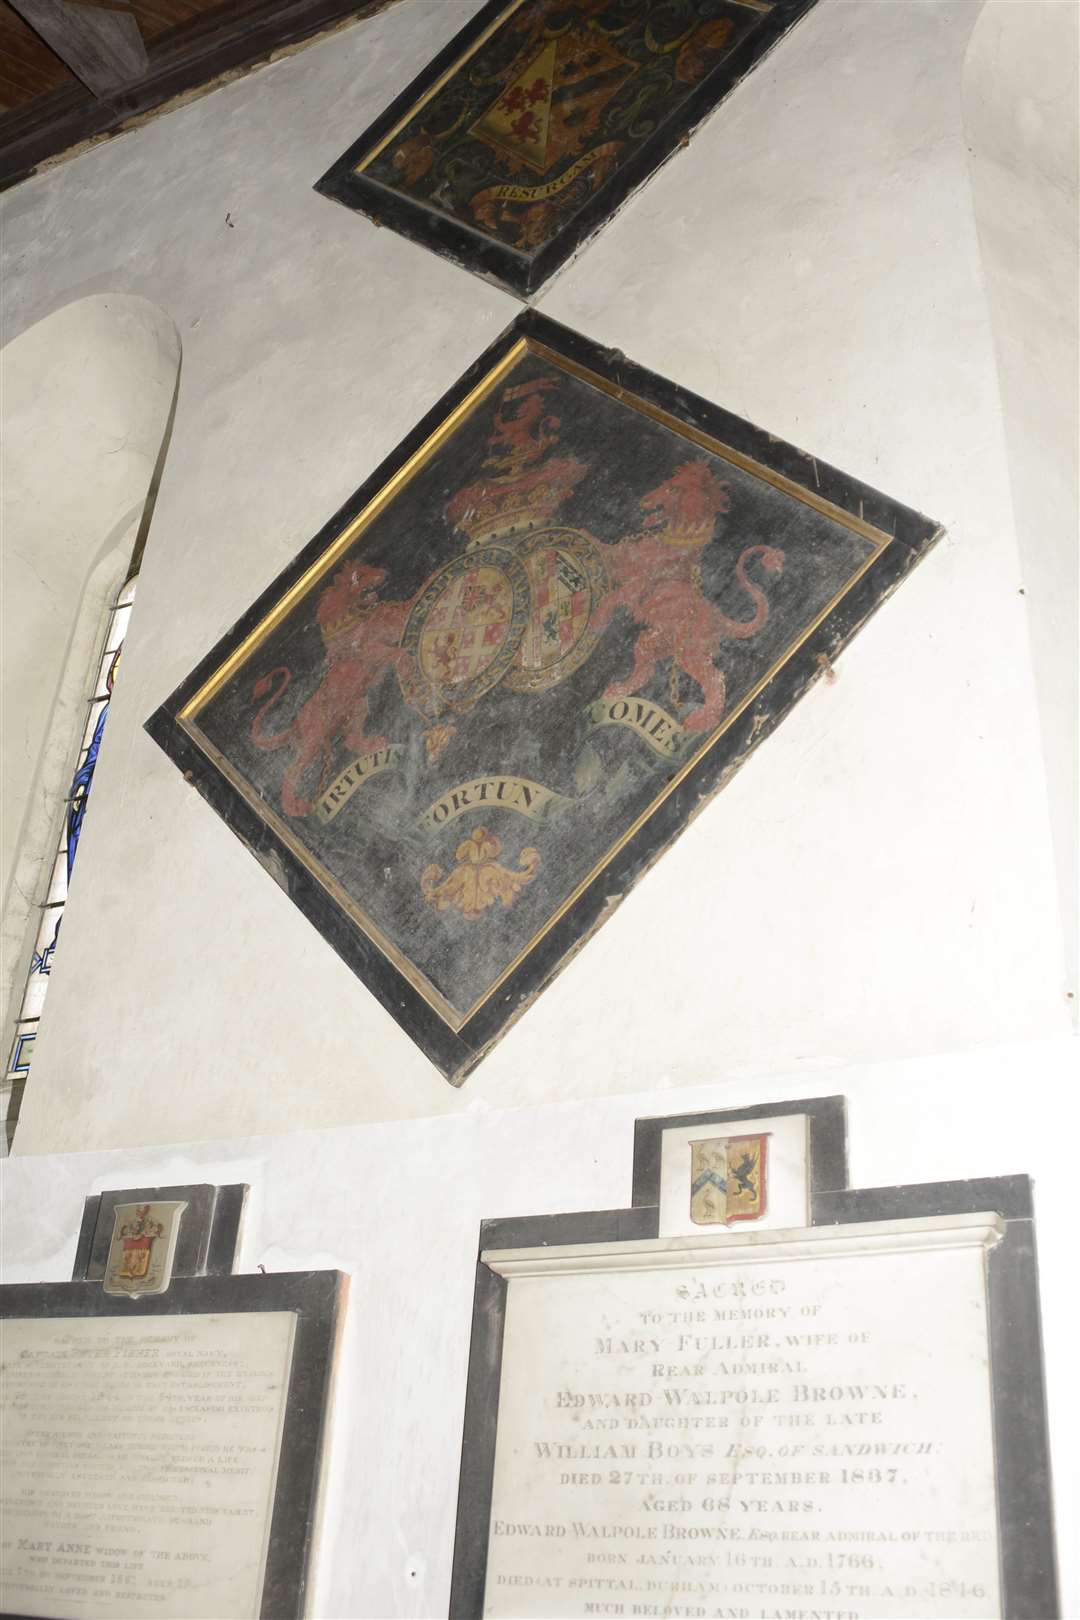 Walmer The Blessed Virgin Mary Church is 900 years old. Duke of Wellingtons Hatchment.Picture: Paul Amos. (31716816)